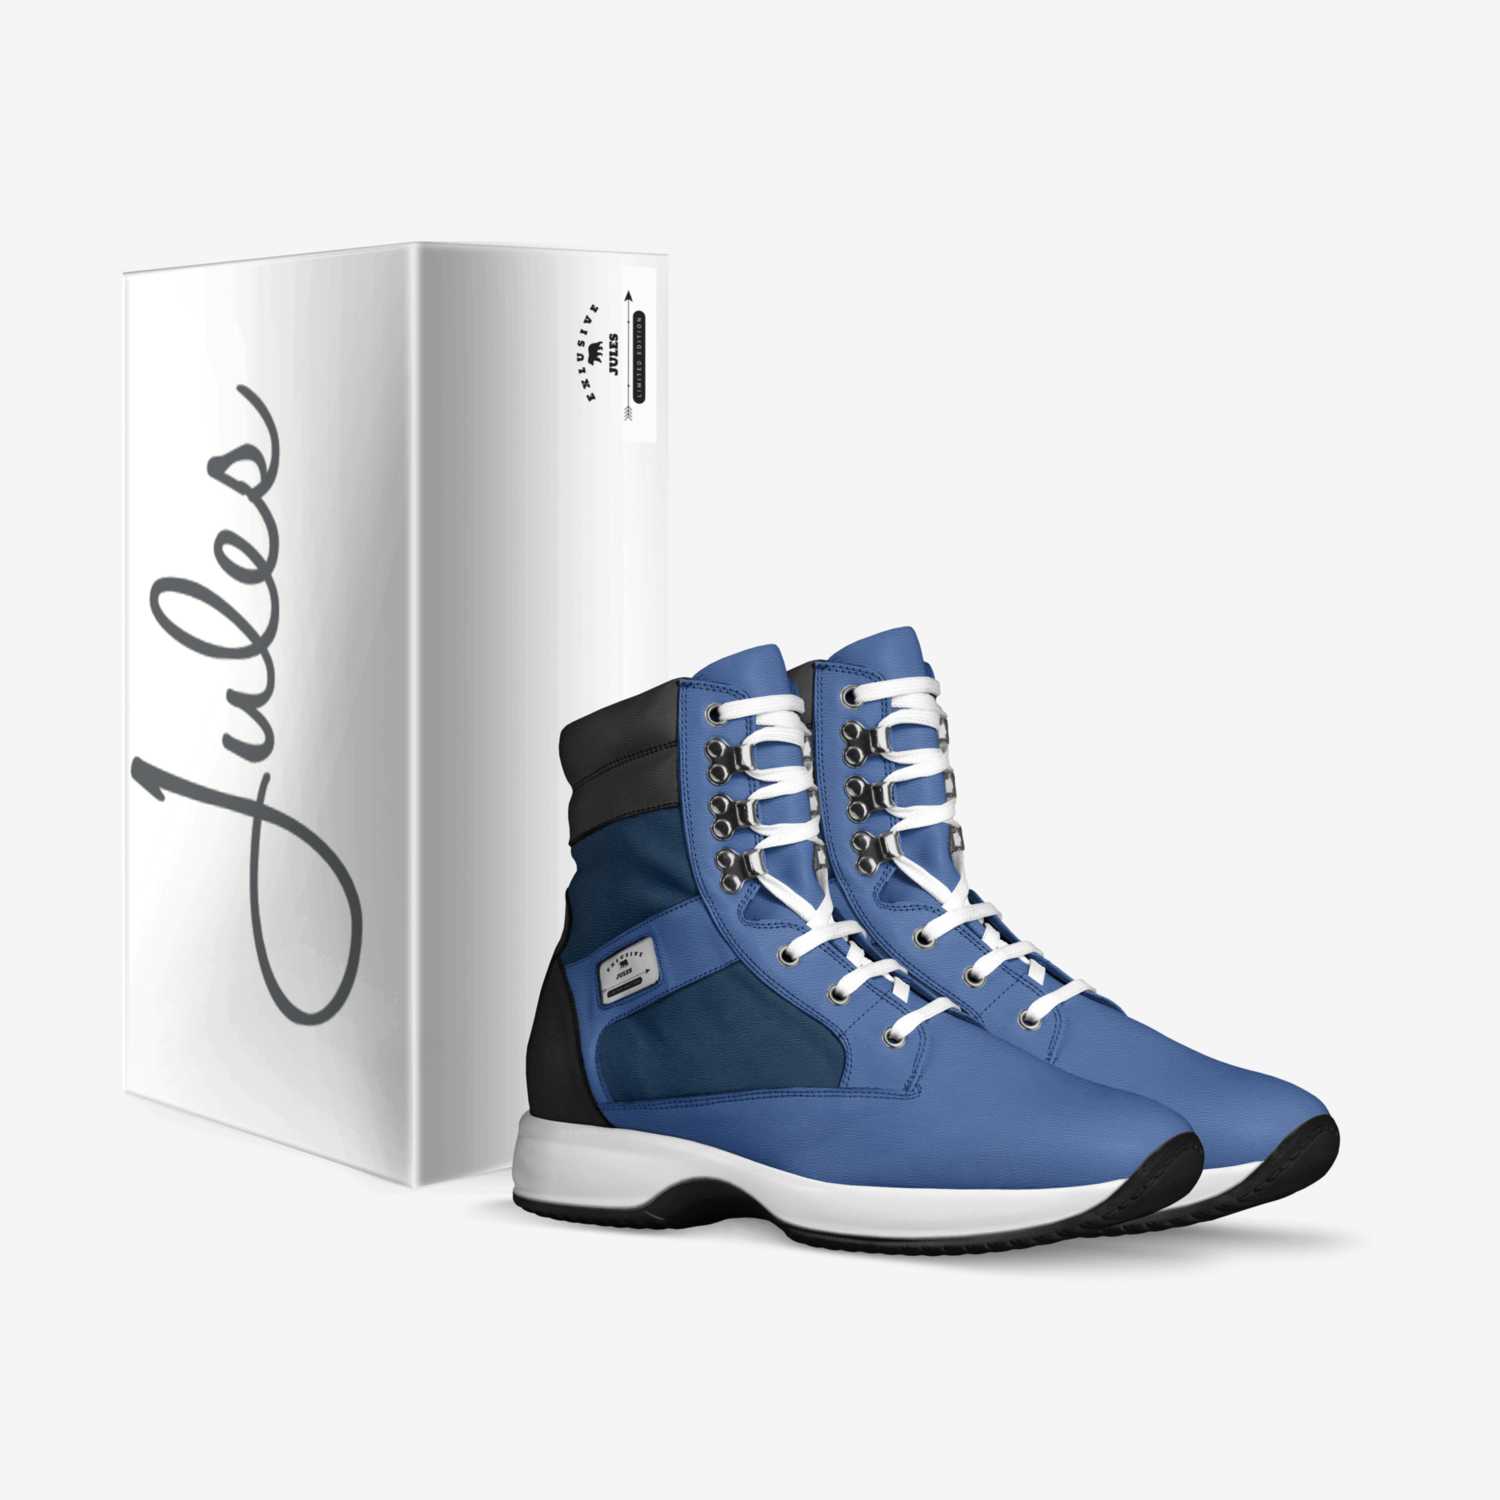 Jules custom made in Italy shoes by Irlune Company | Box view